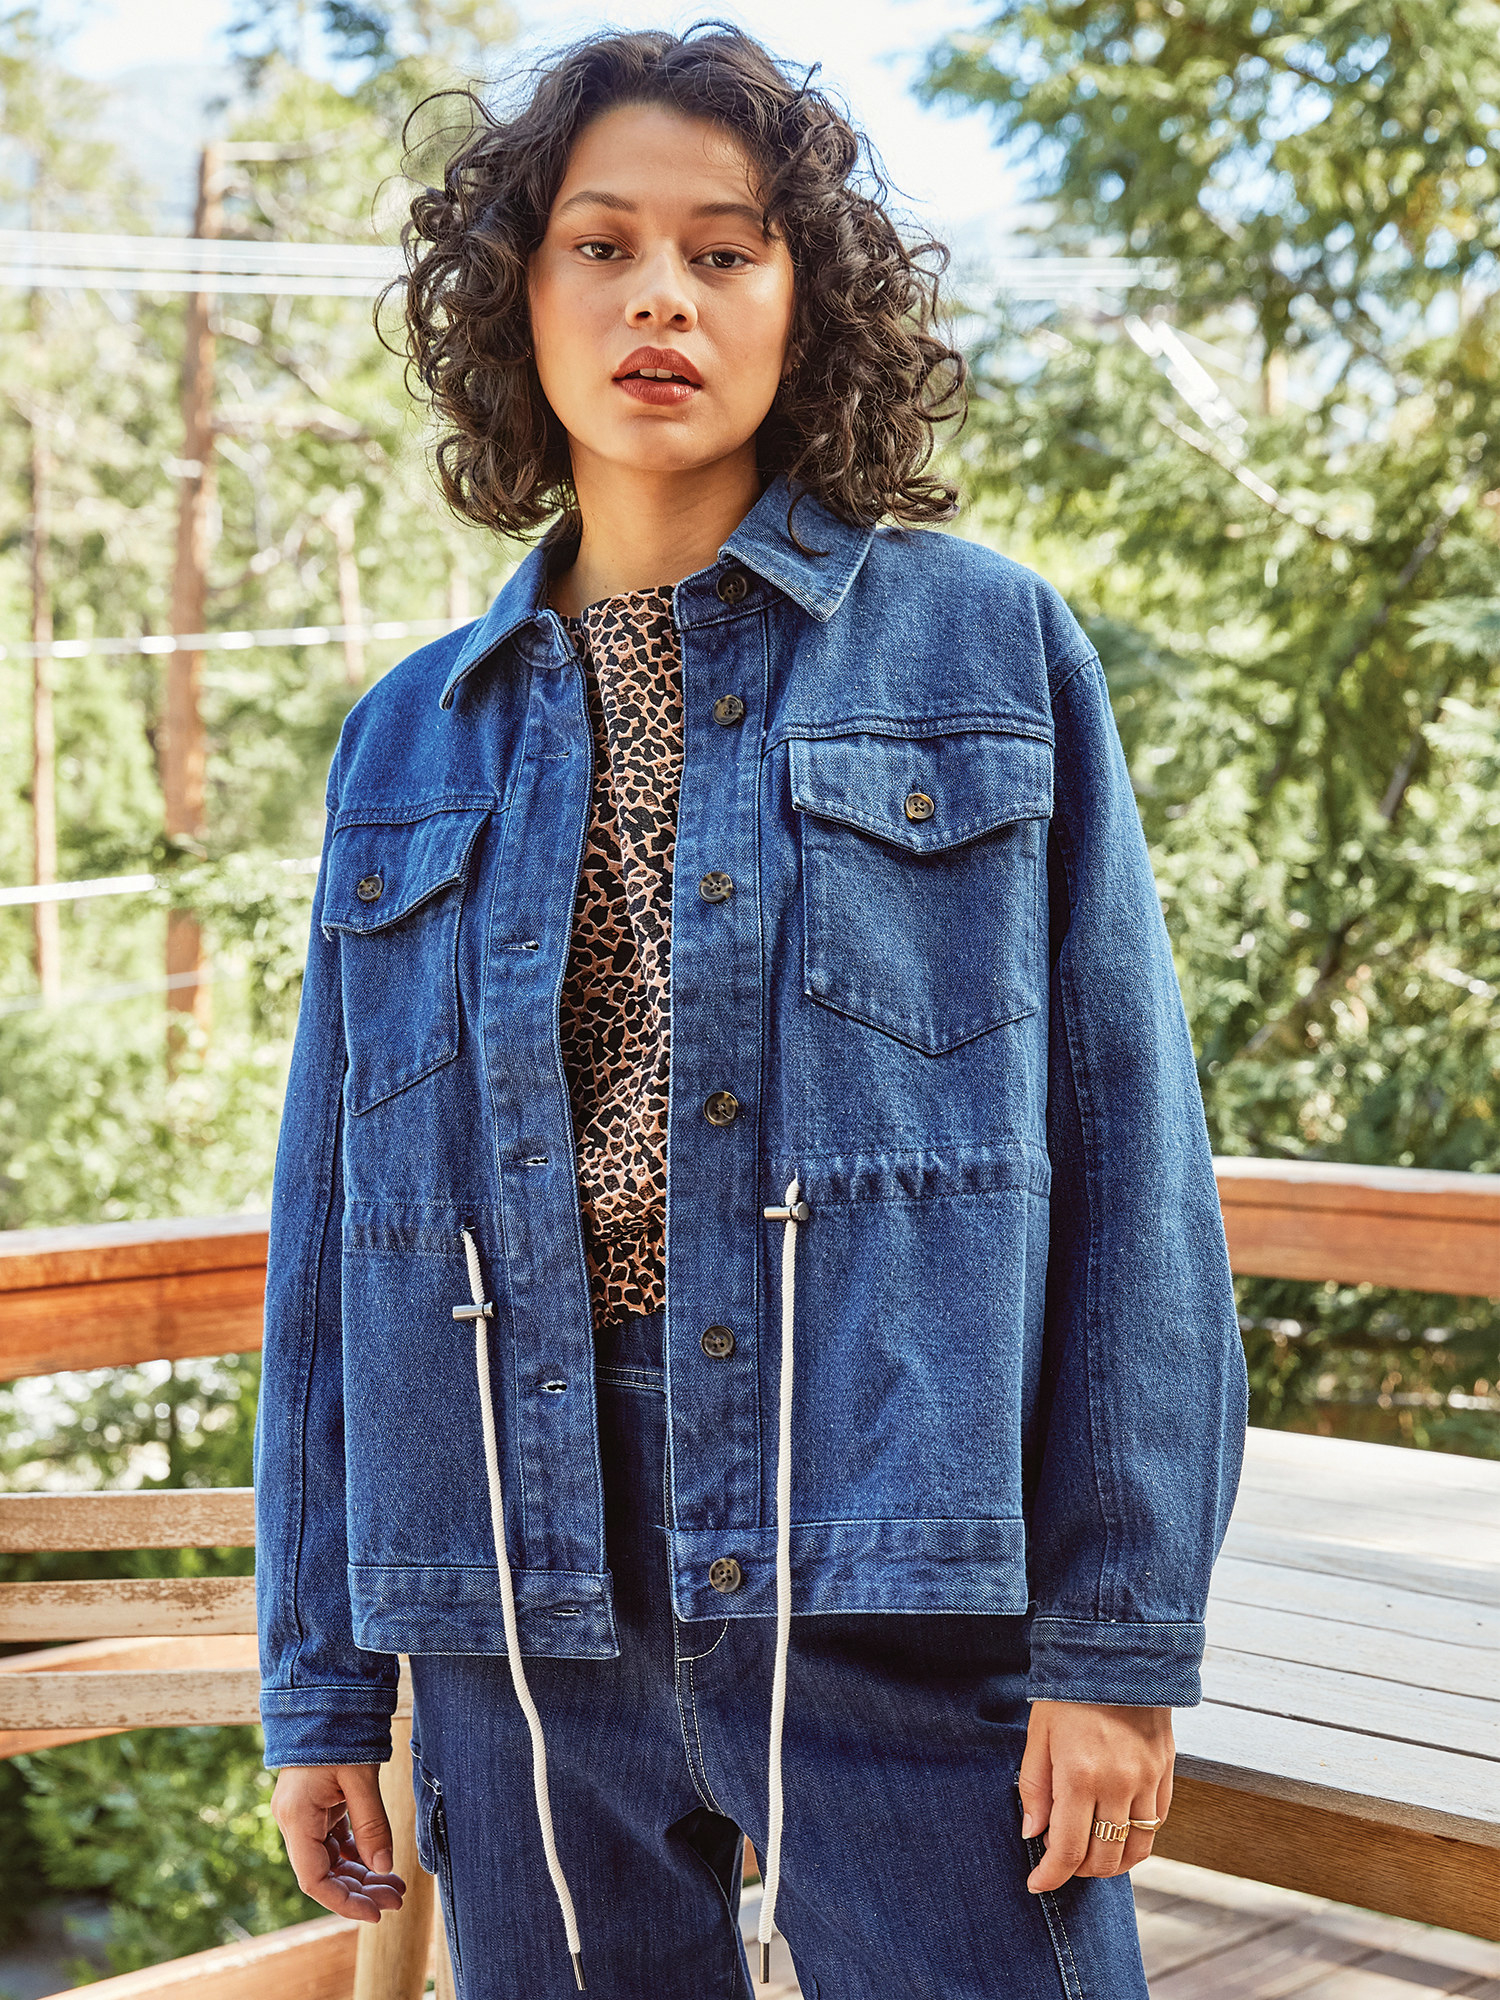 Model wearing denim jacket with midsection drawstring